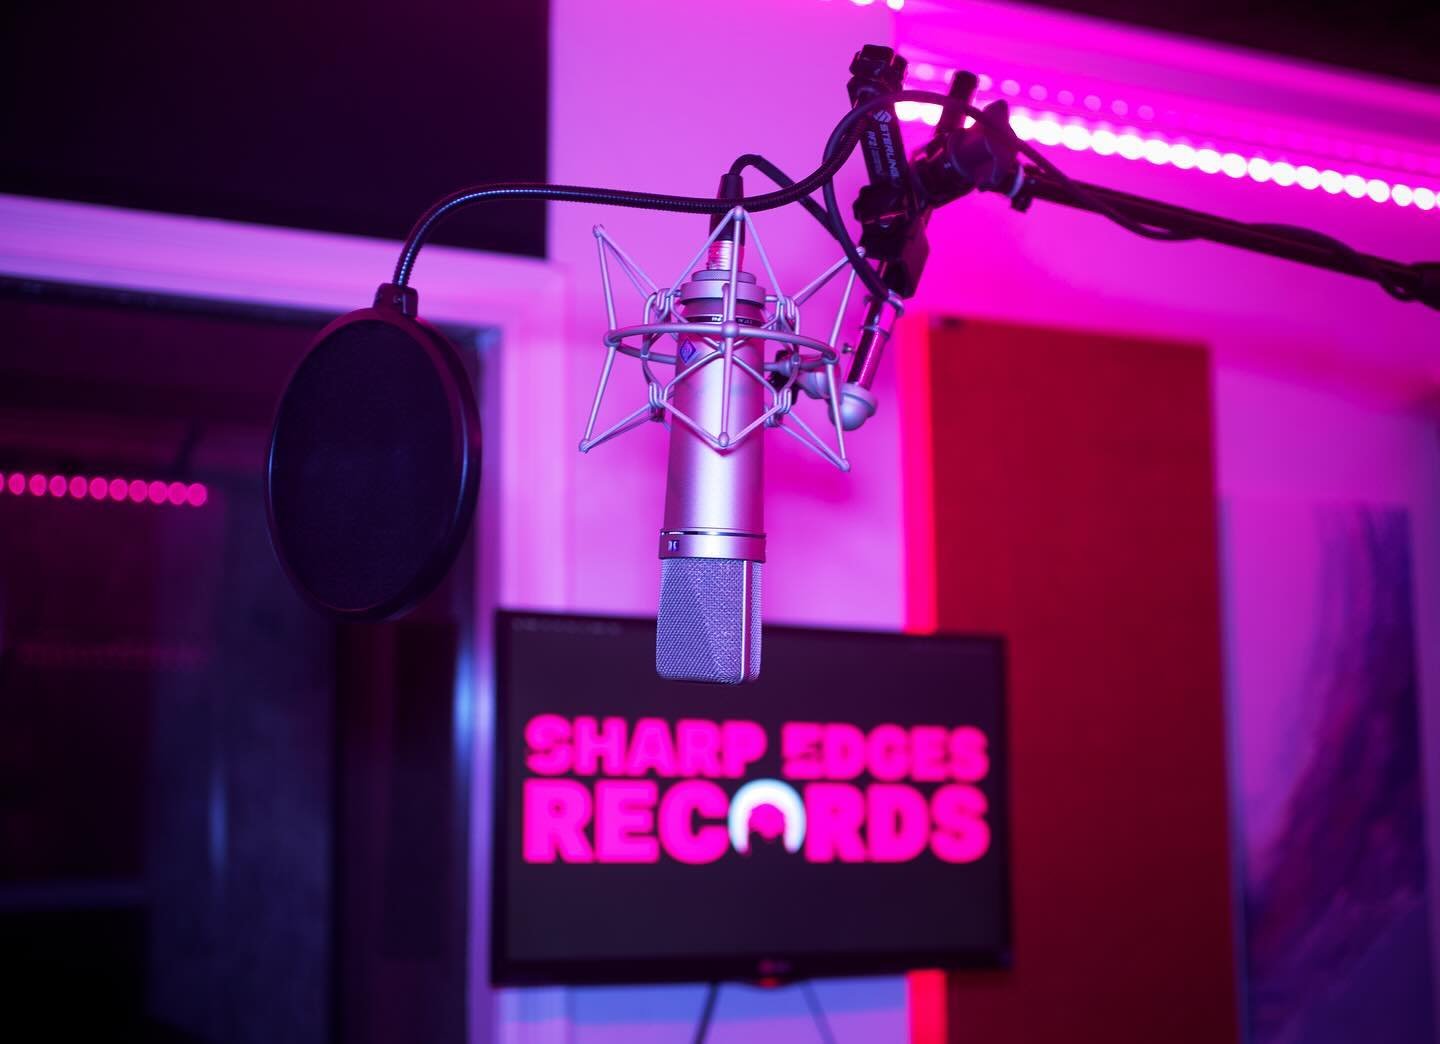 Studio Appreciation Post 🎶

✅ Good Energy / Vibes ✨

✅ Fun Lighting 💡

✅ Great Gear 🎤 

✅ Great People 🤗

Did we mention our merch store is LIVE? 👀 

Book our studio / Shop our merch at the link in bio 

🩷🩶🩵

#studioflow #studiolife #recordin